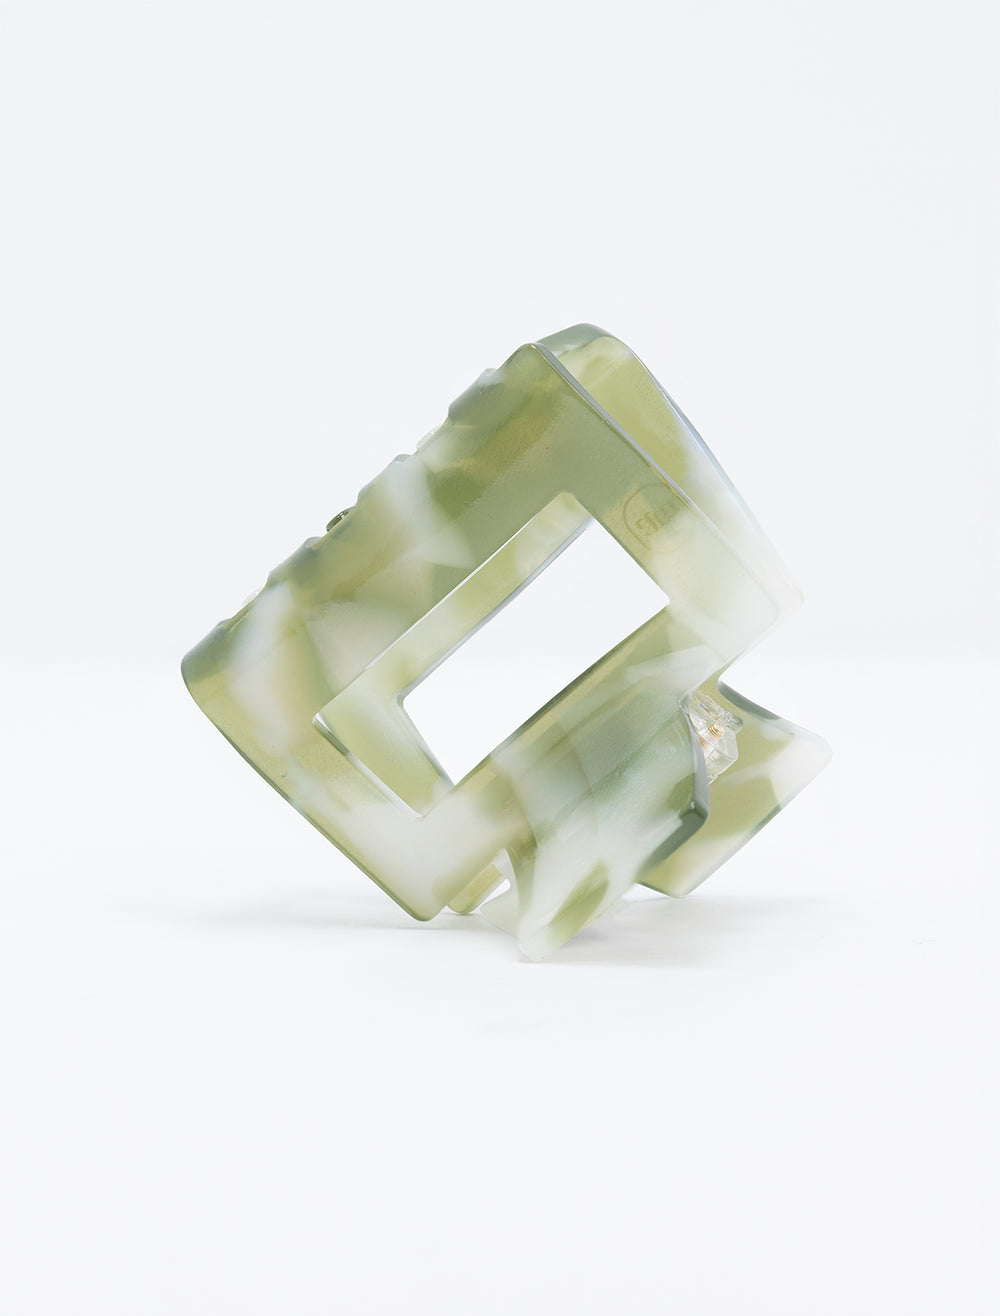 Alternative angle view of Tiepology's Eco Kylie Hair Clip in Olive Pearl.